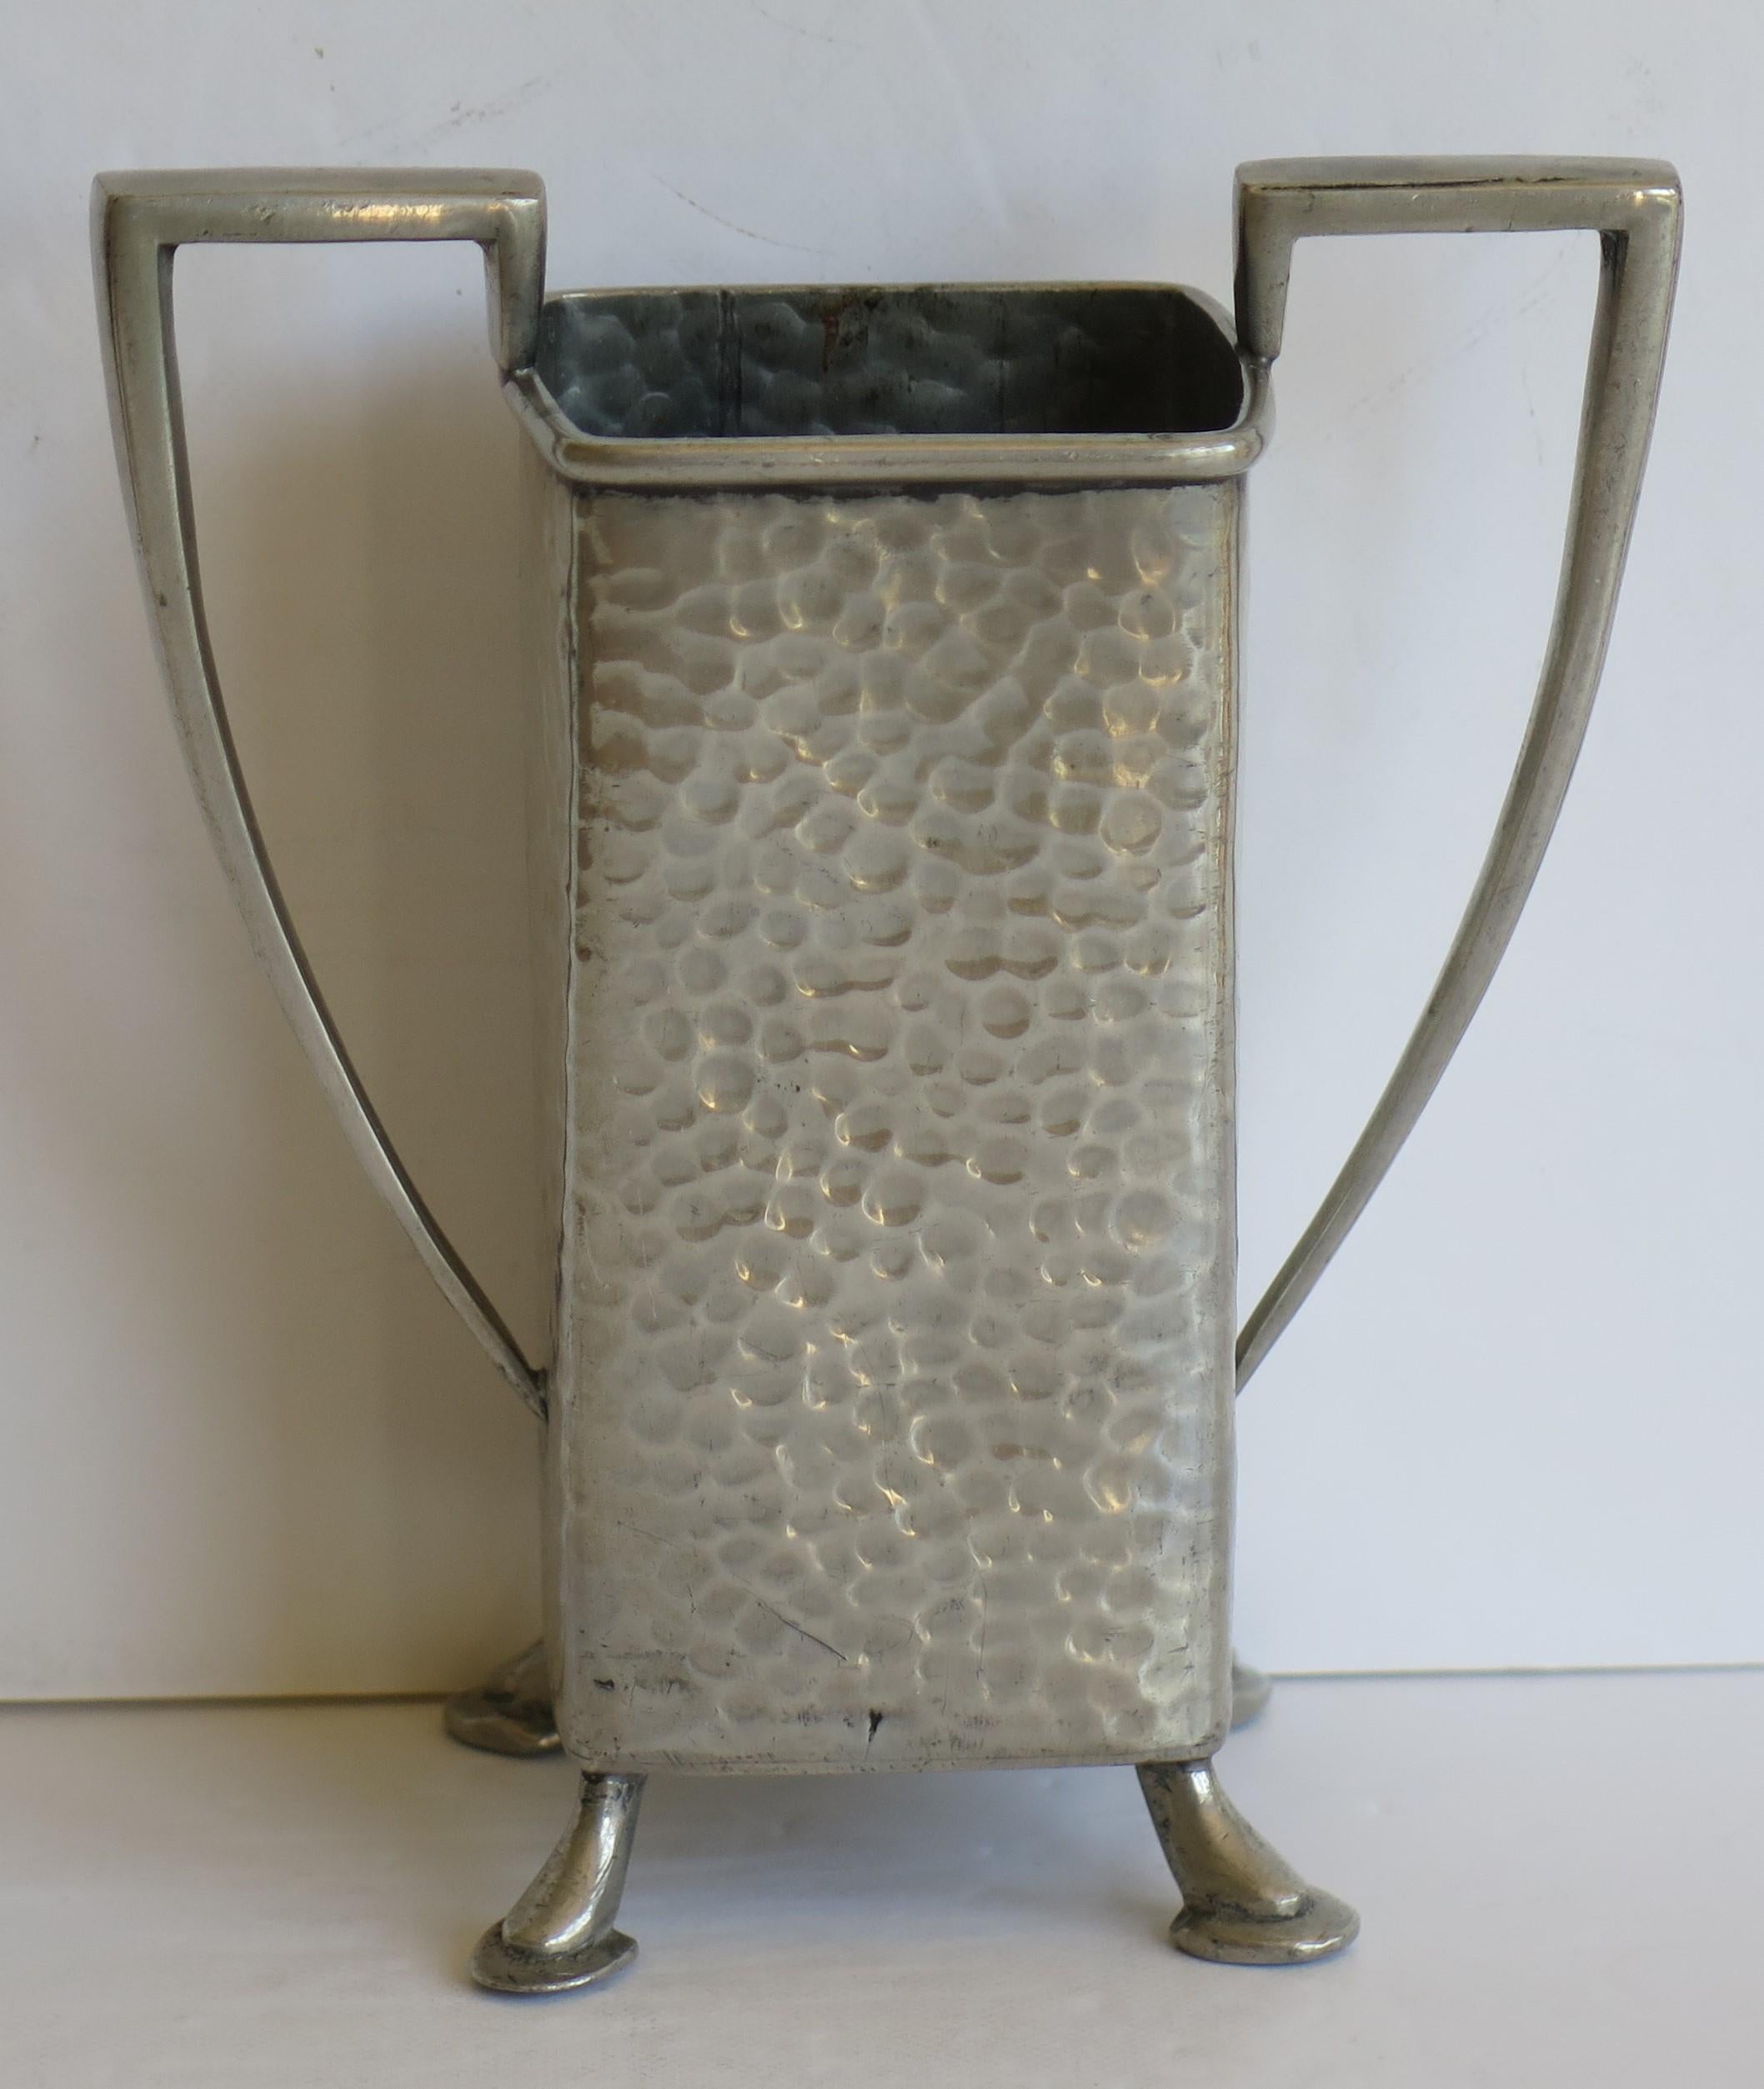 This is a very good hand made, hammered pewter vase made by Civic Pewter, Sheffield, England, during the Art Deco period, Circa 1925

The small vase has a lovely shape with two angular handles and sitting on four small feet.

The shape is very